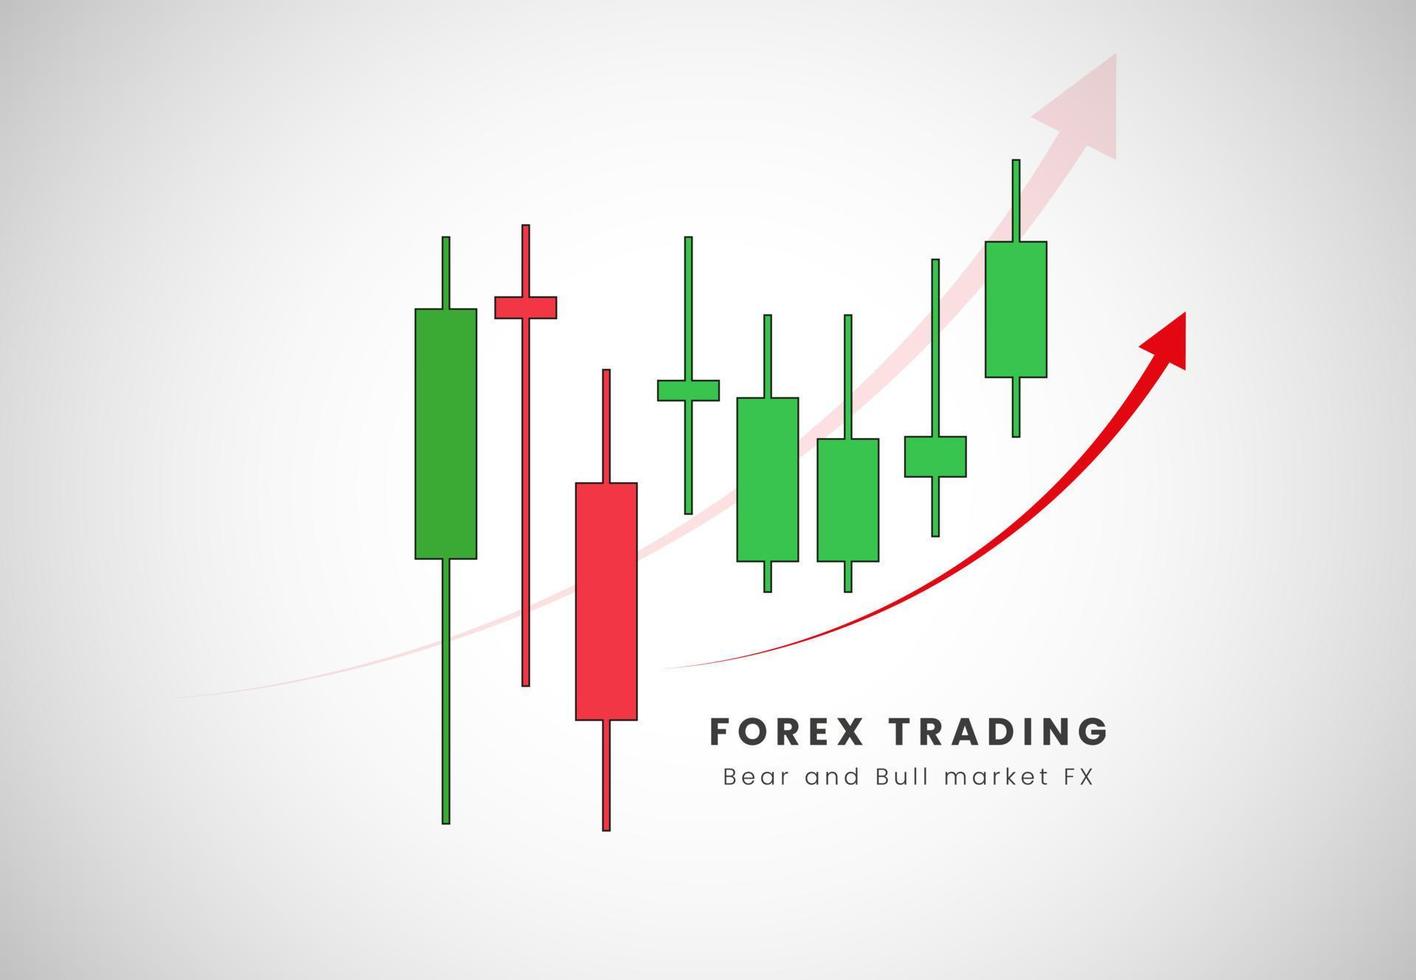 Forex price action candles for red and green, Forex Trading charts in Signals vector illustration. Buy and sell indicators for forex trade up trend